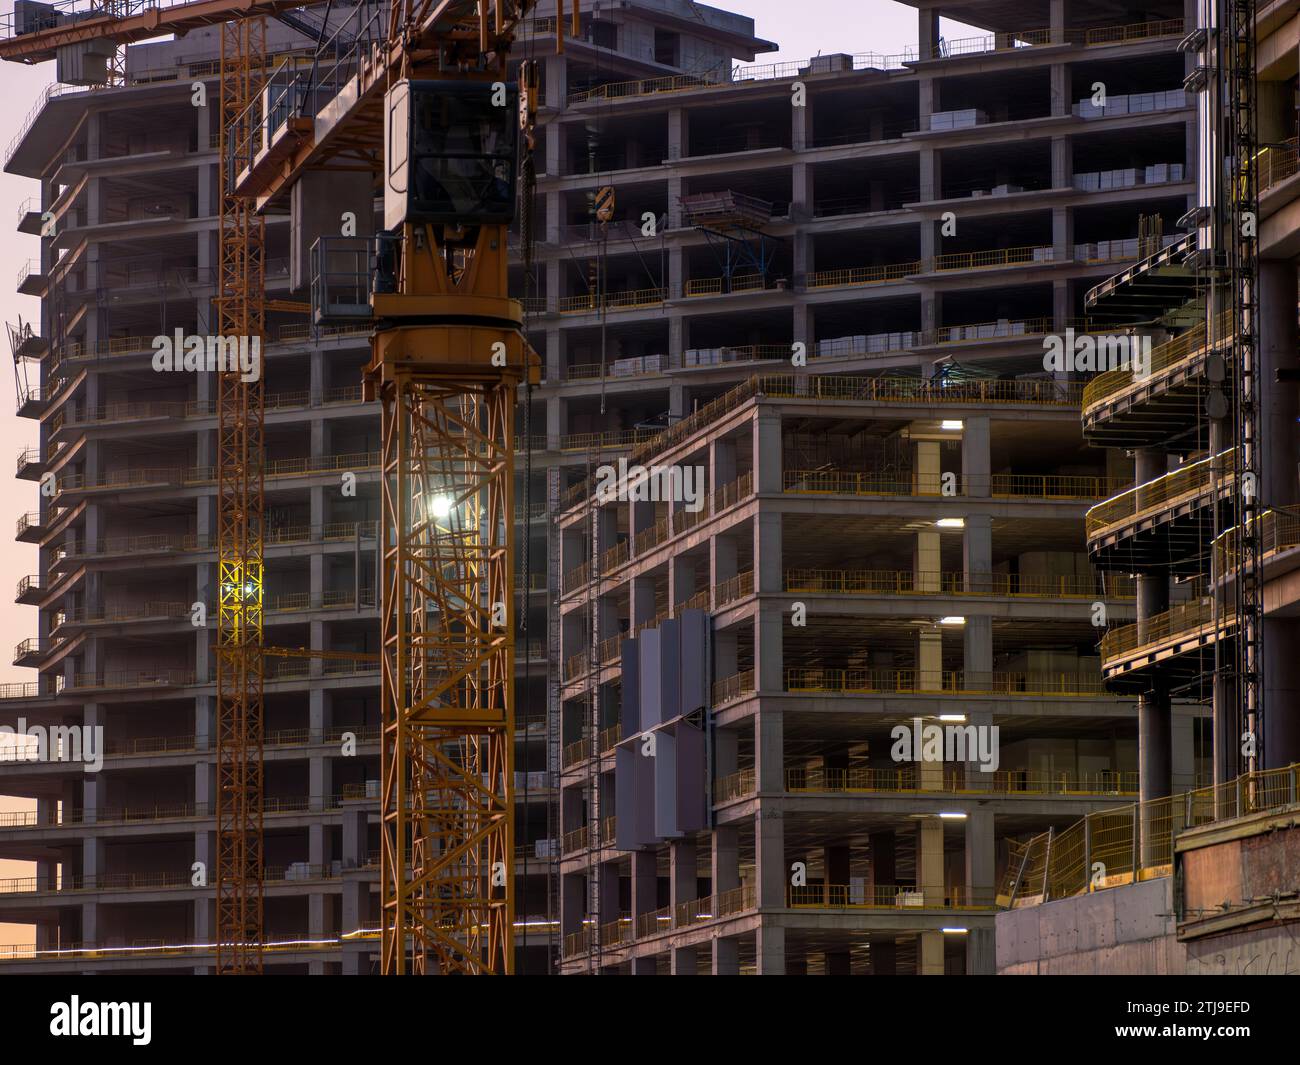 İstanbul, Turkey - August 26, 2020: The construction site of International Financial Center in İstanbul. Stock Photo